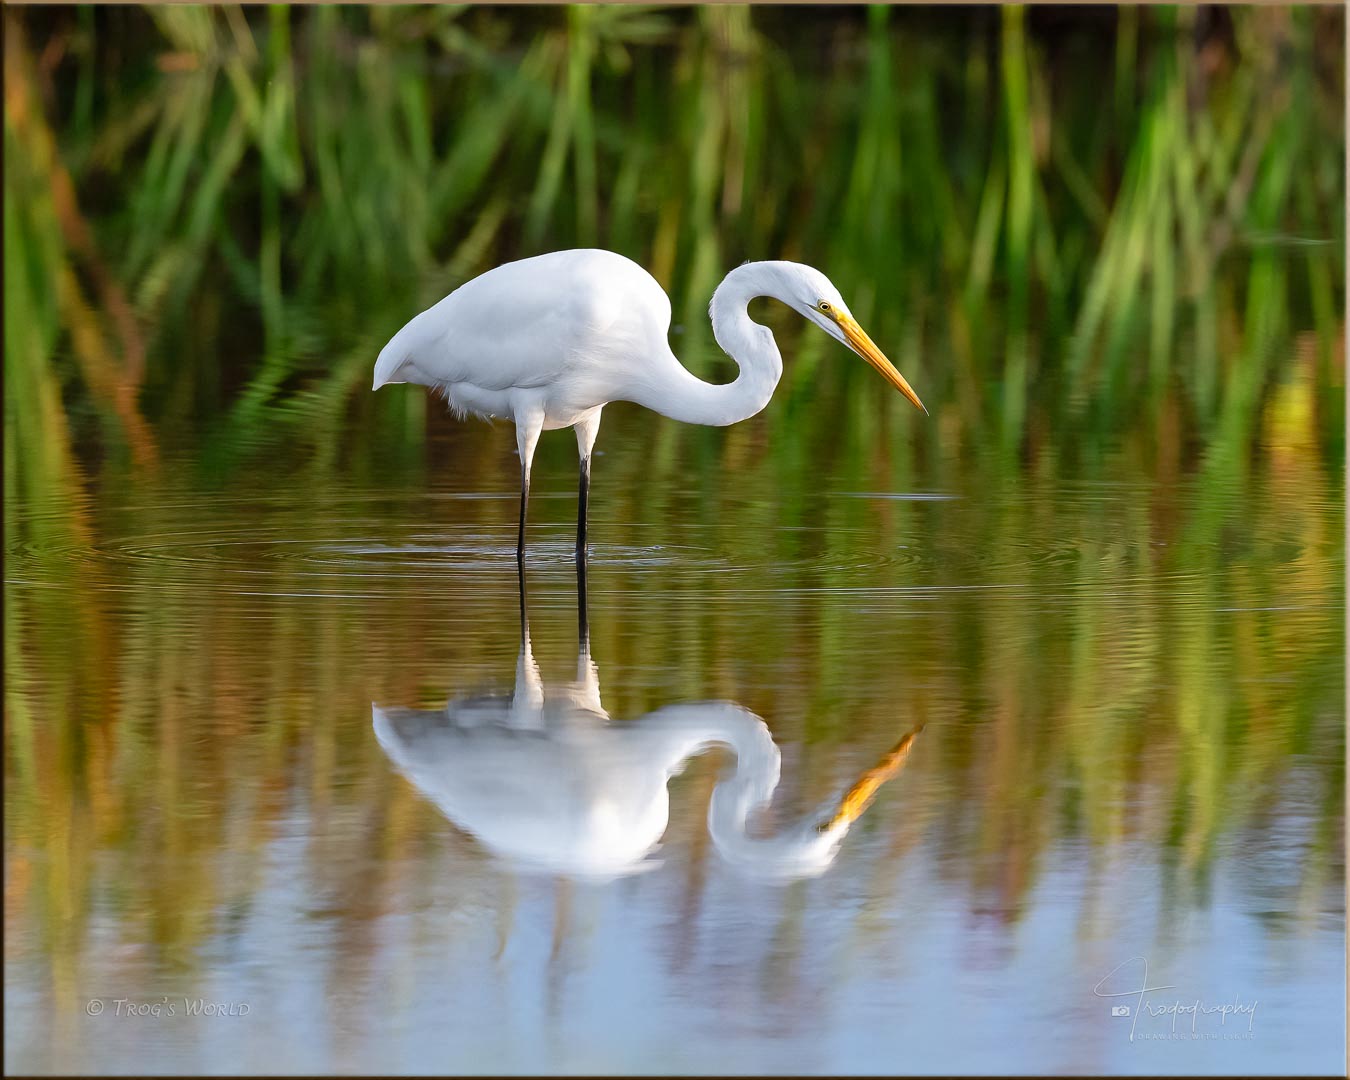 Great Egret fishing in a shallow pond